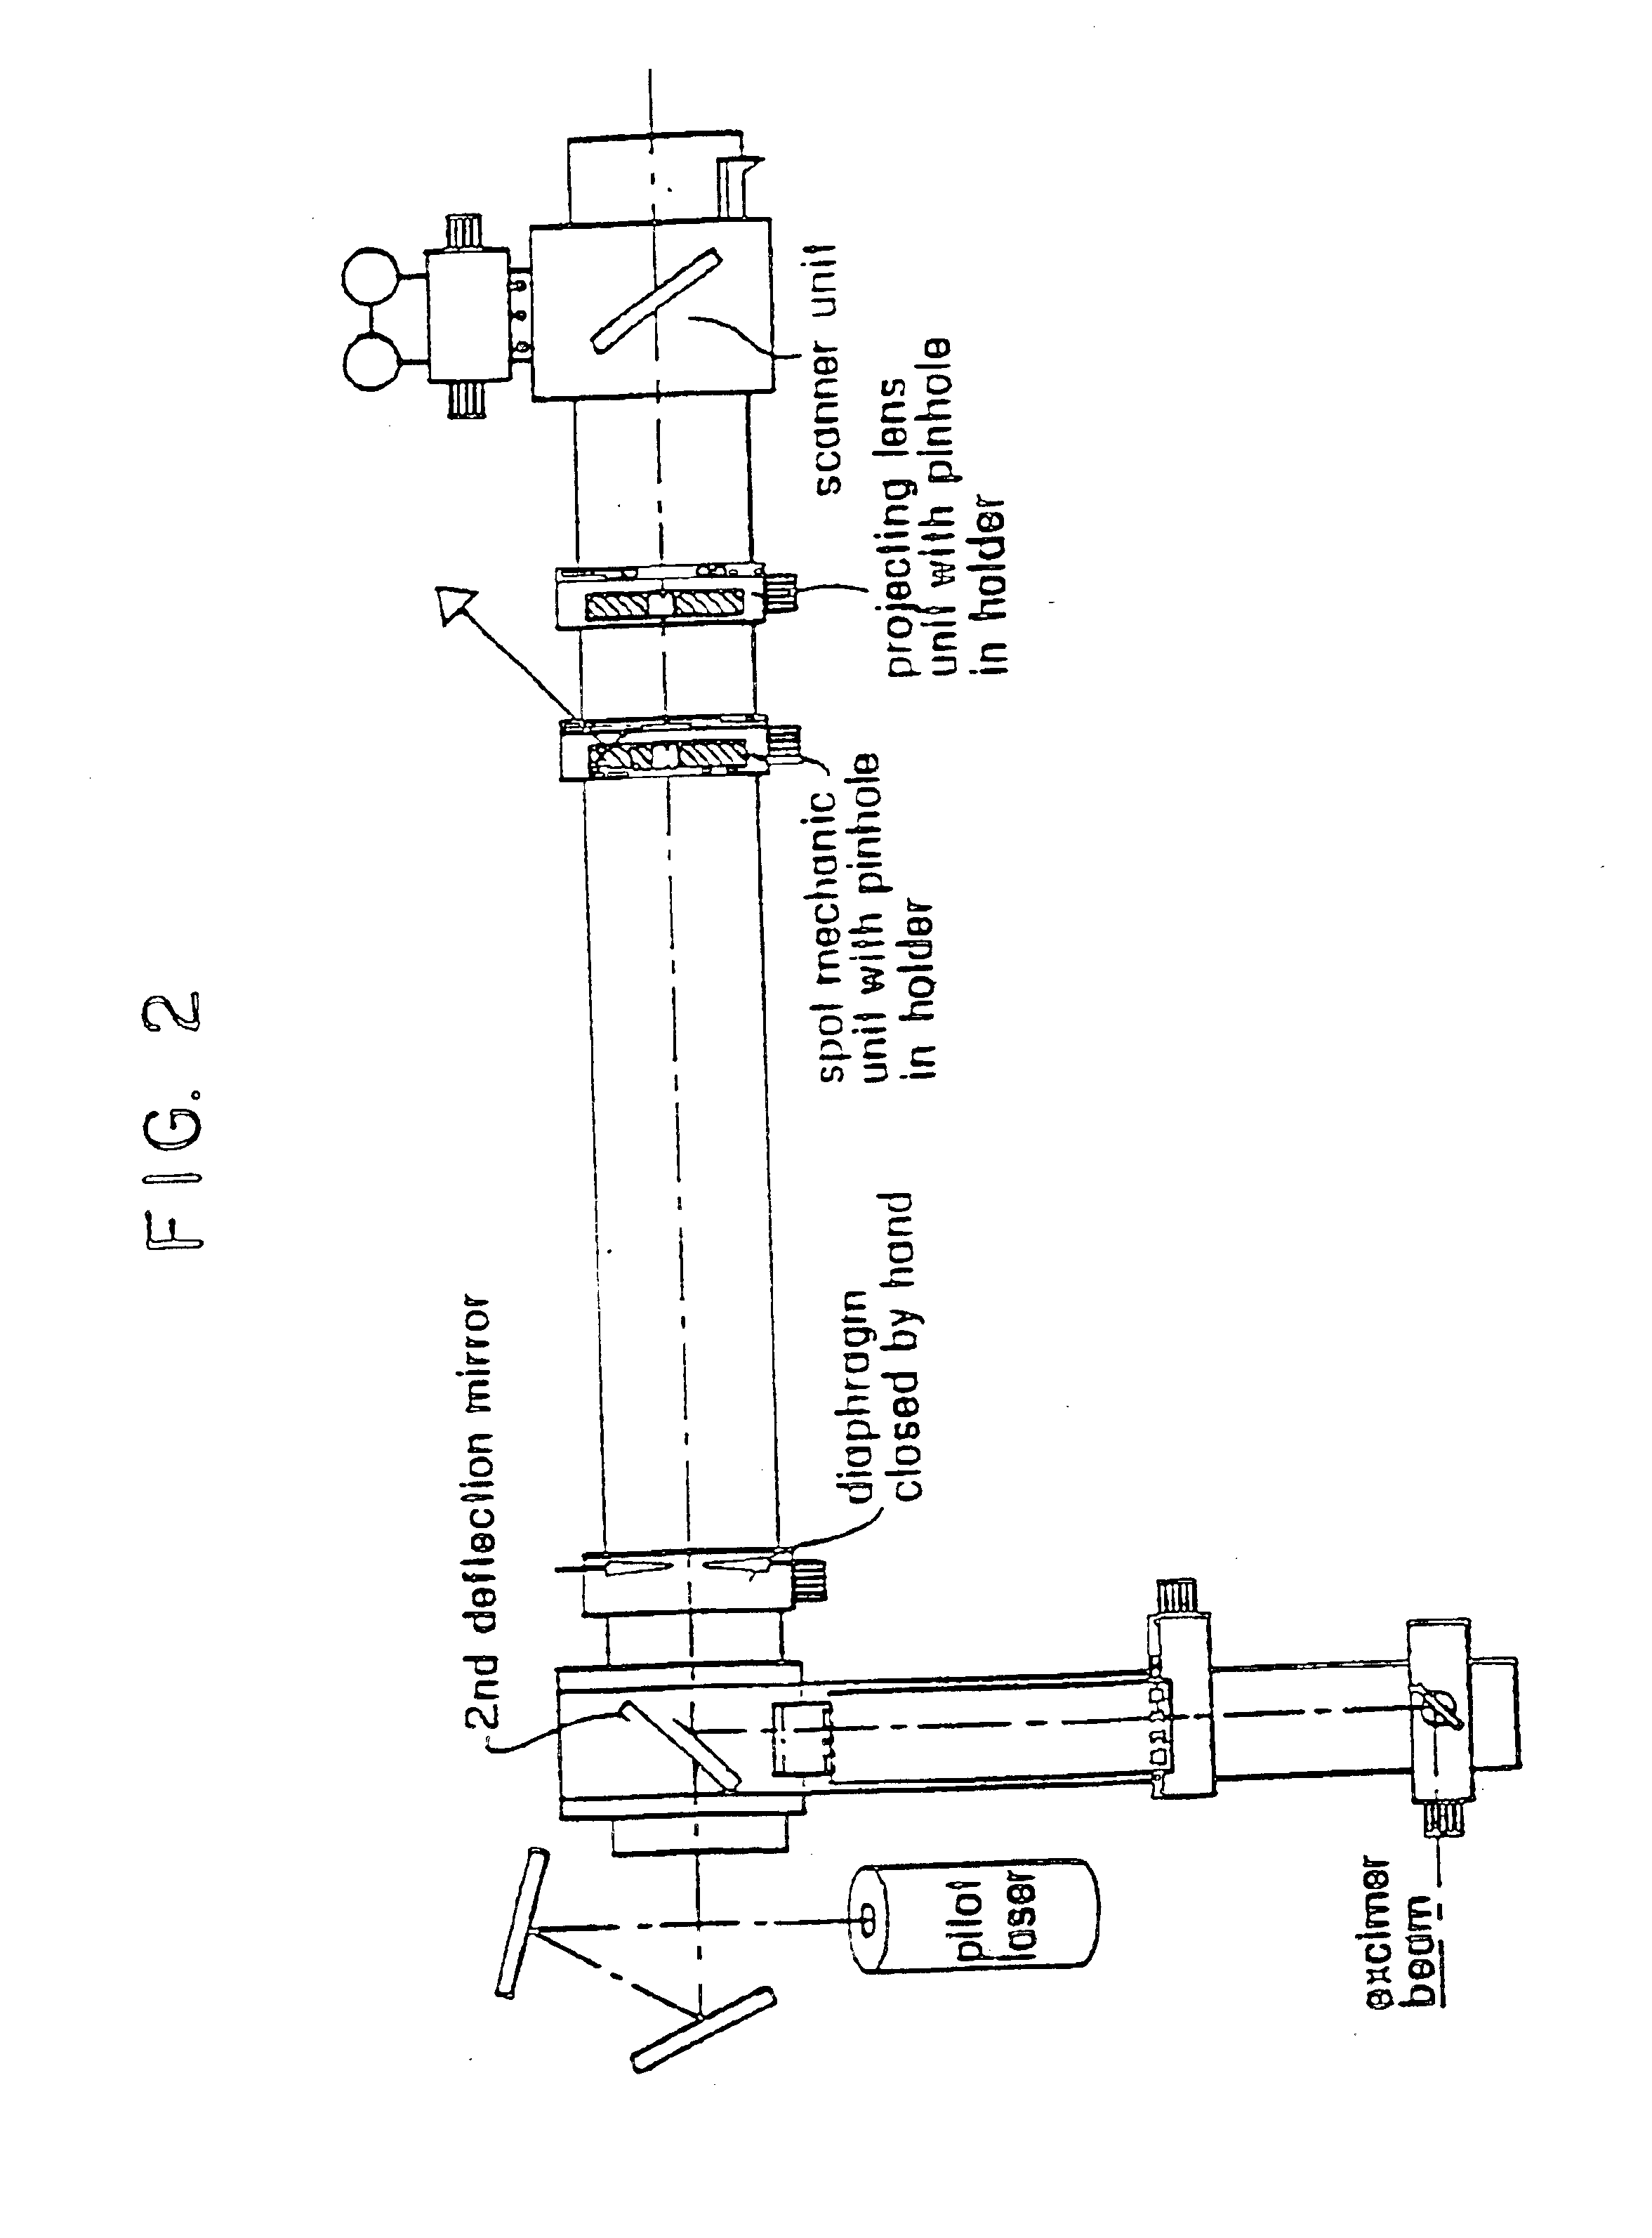 Apparatus and method for performing presbyopia corrective surgery